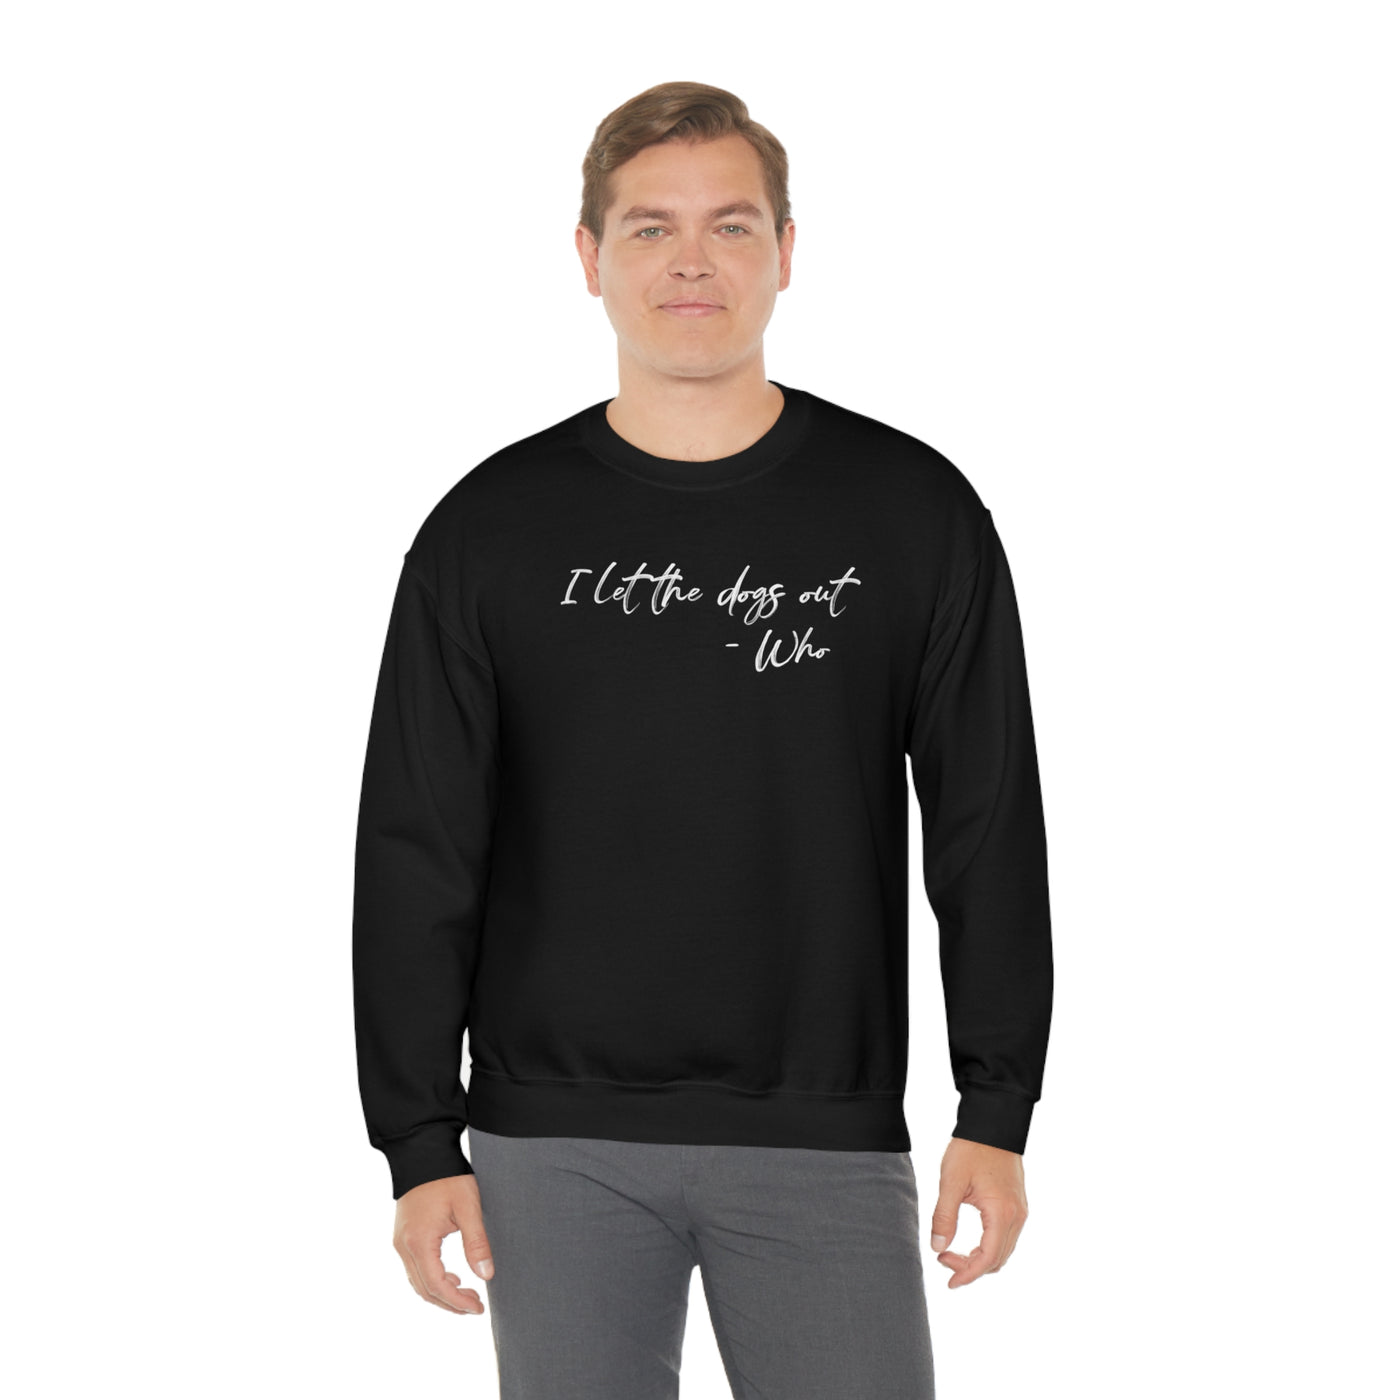 I Let The Dogs Out Crewneck Sweatshirt